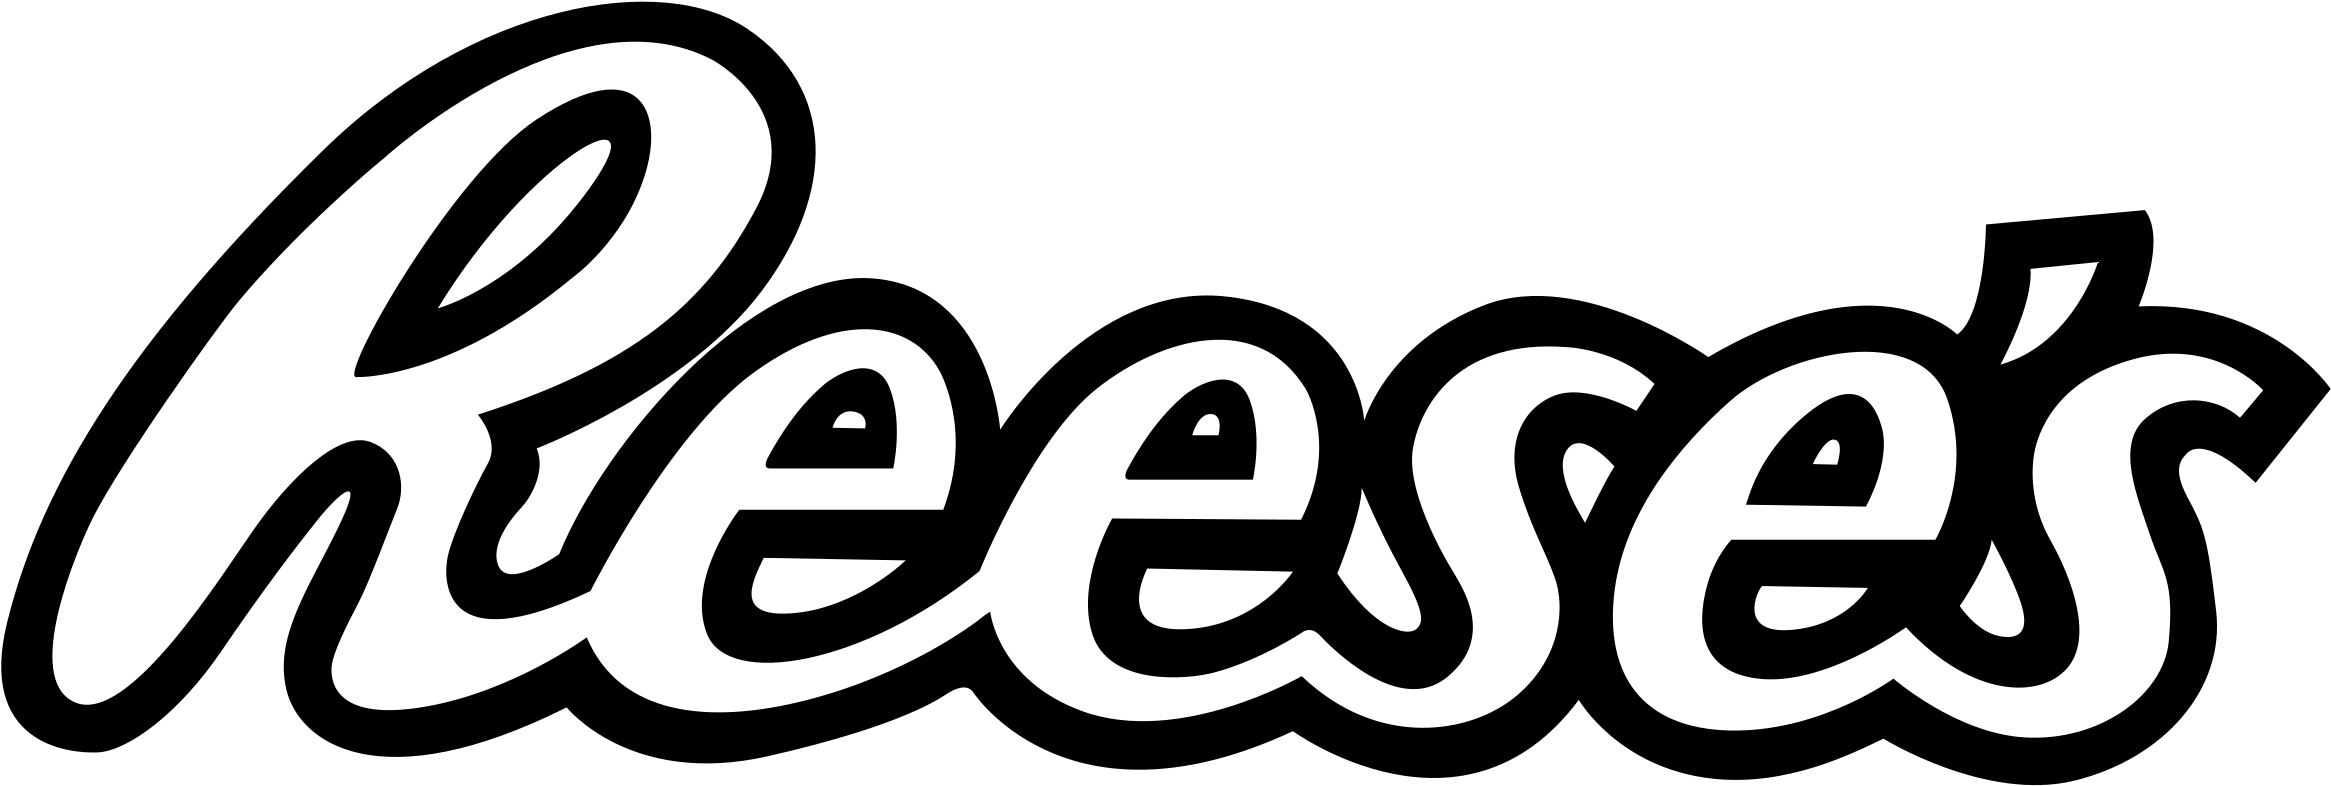 Reese's Logo Png Transparent - Reeses Peanut Butter Cups Logo (2400x2400), Png Download